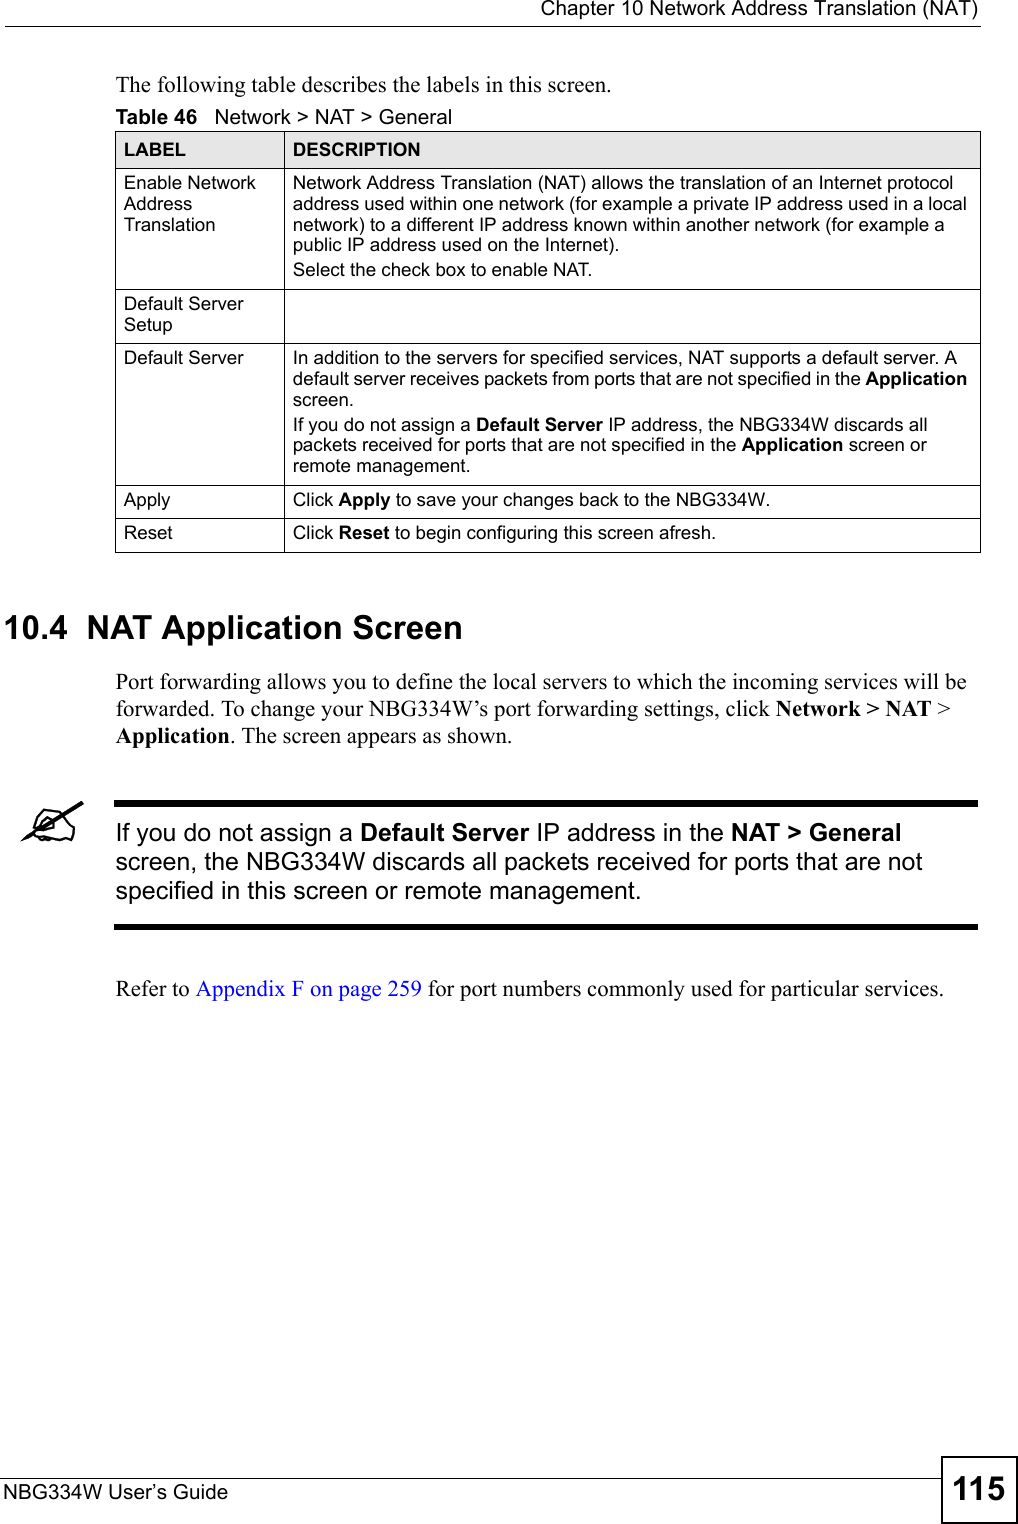  Chapter 10 Network Address Translation (NAT)NBG334W User’s Guide 115The following table describes the labels in this screen.10.4  NAT Application Screen   Port forwarding allows you to define the local servers to which the incoming services will be forwarded. To change your NBG334W’s port forwarding settings, click Network &gt; NAT &gt; Application. The screen appears as shown.&quot;If you do not assign a Default Server IP address in the NAT &gt; General screen, the NBG334W discards all packets received for ports that are not specified in this screen or remote management.Refer to Appendix F on page 259 for port numbers commonly used for particular services.Table 46   Network &gt; NAT &gt; GeneralLABEL DESCRIPTIONEnable Network Address TranslationNetwork Address Translation (NAT) allows the translation of an Internet protocol address used within one network (for example a private IP address used in a local network) to a different IP address known within another network (for example a public IP address used on the Internet). Select the check box to enable NAT.Default Server SetupDefault Server In addition to the servers for specified services, NAT supports a default server. A default server receives packets from ports that are not specified in the Application screen. If you do not assign a Default Server IP address, the NBG334W discards all packets received for ports that are not specified in the Application screen or remote management.Apply Click Apply to save your changes back to the NBG334W.Reset Click Reset to begin configuring this screen afresh.